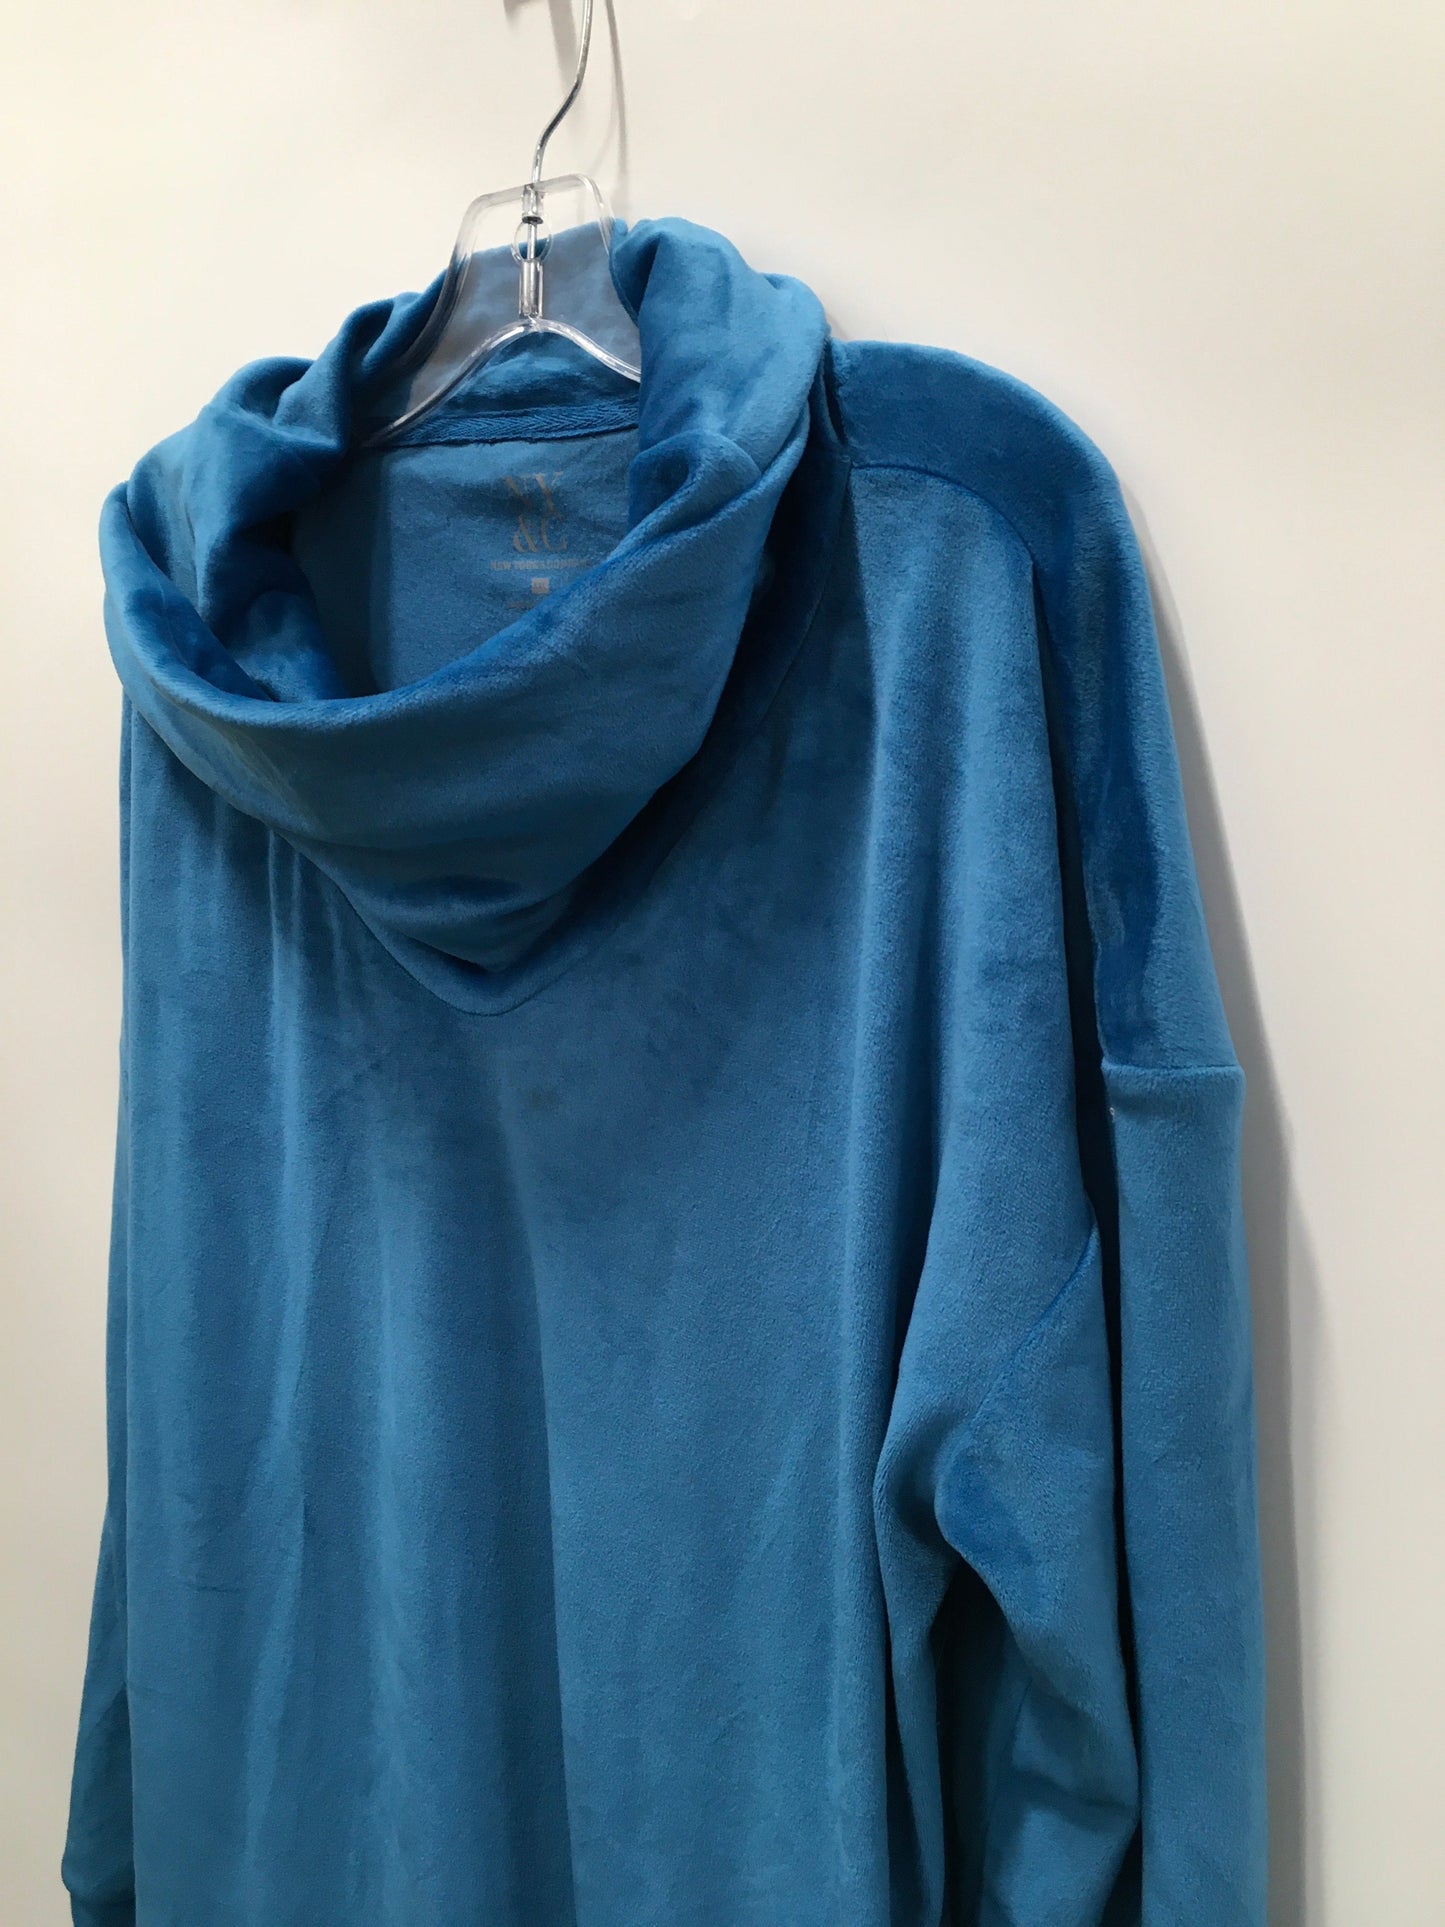 Blue Dress Sweater New York And Co, Size 1x